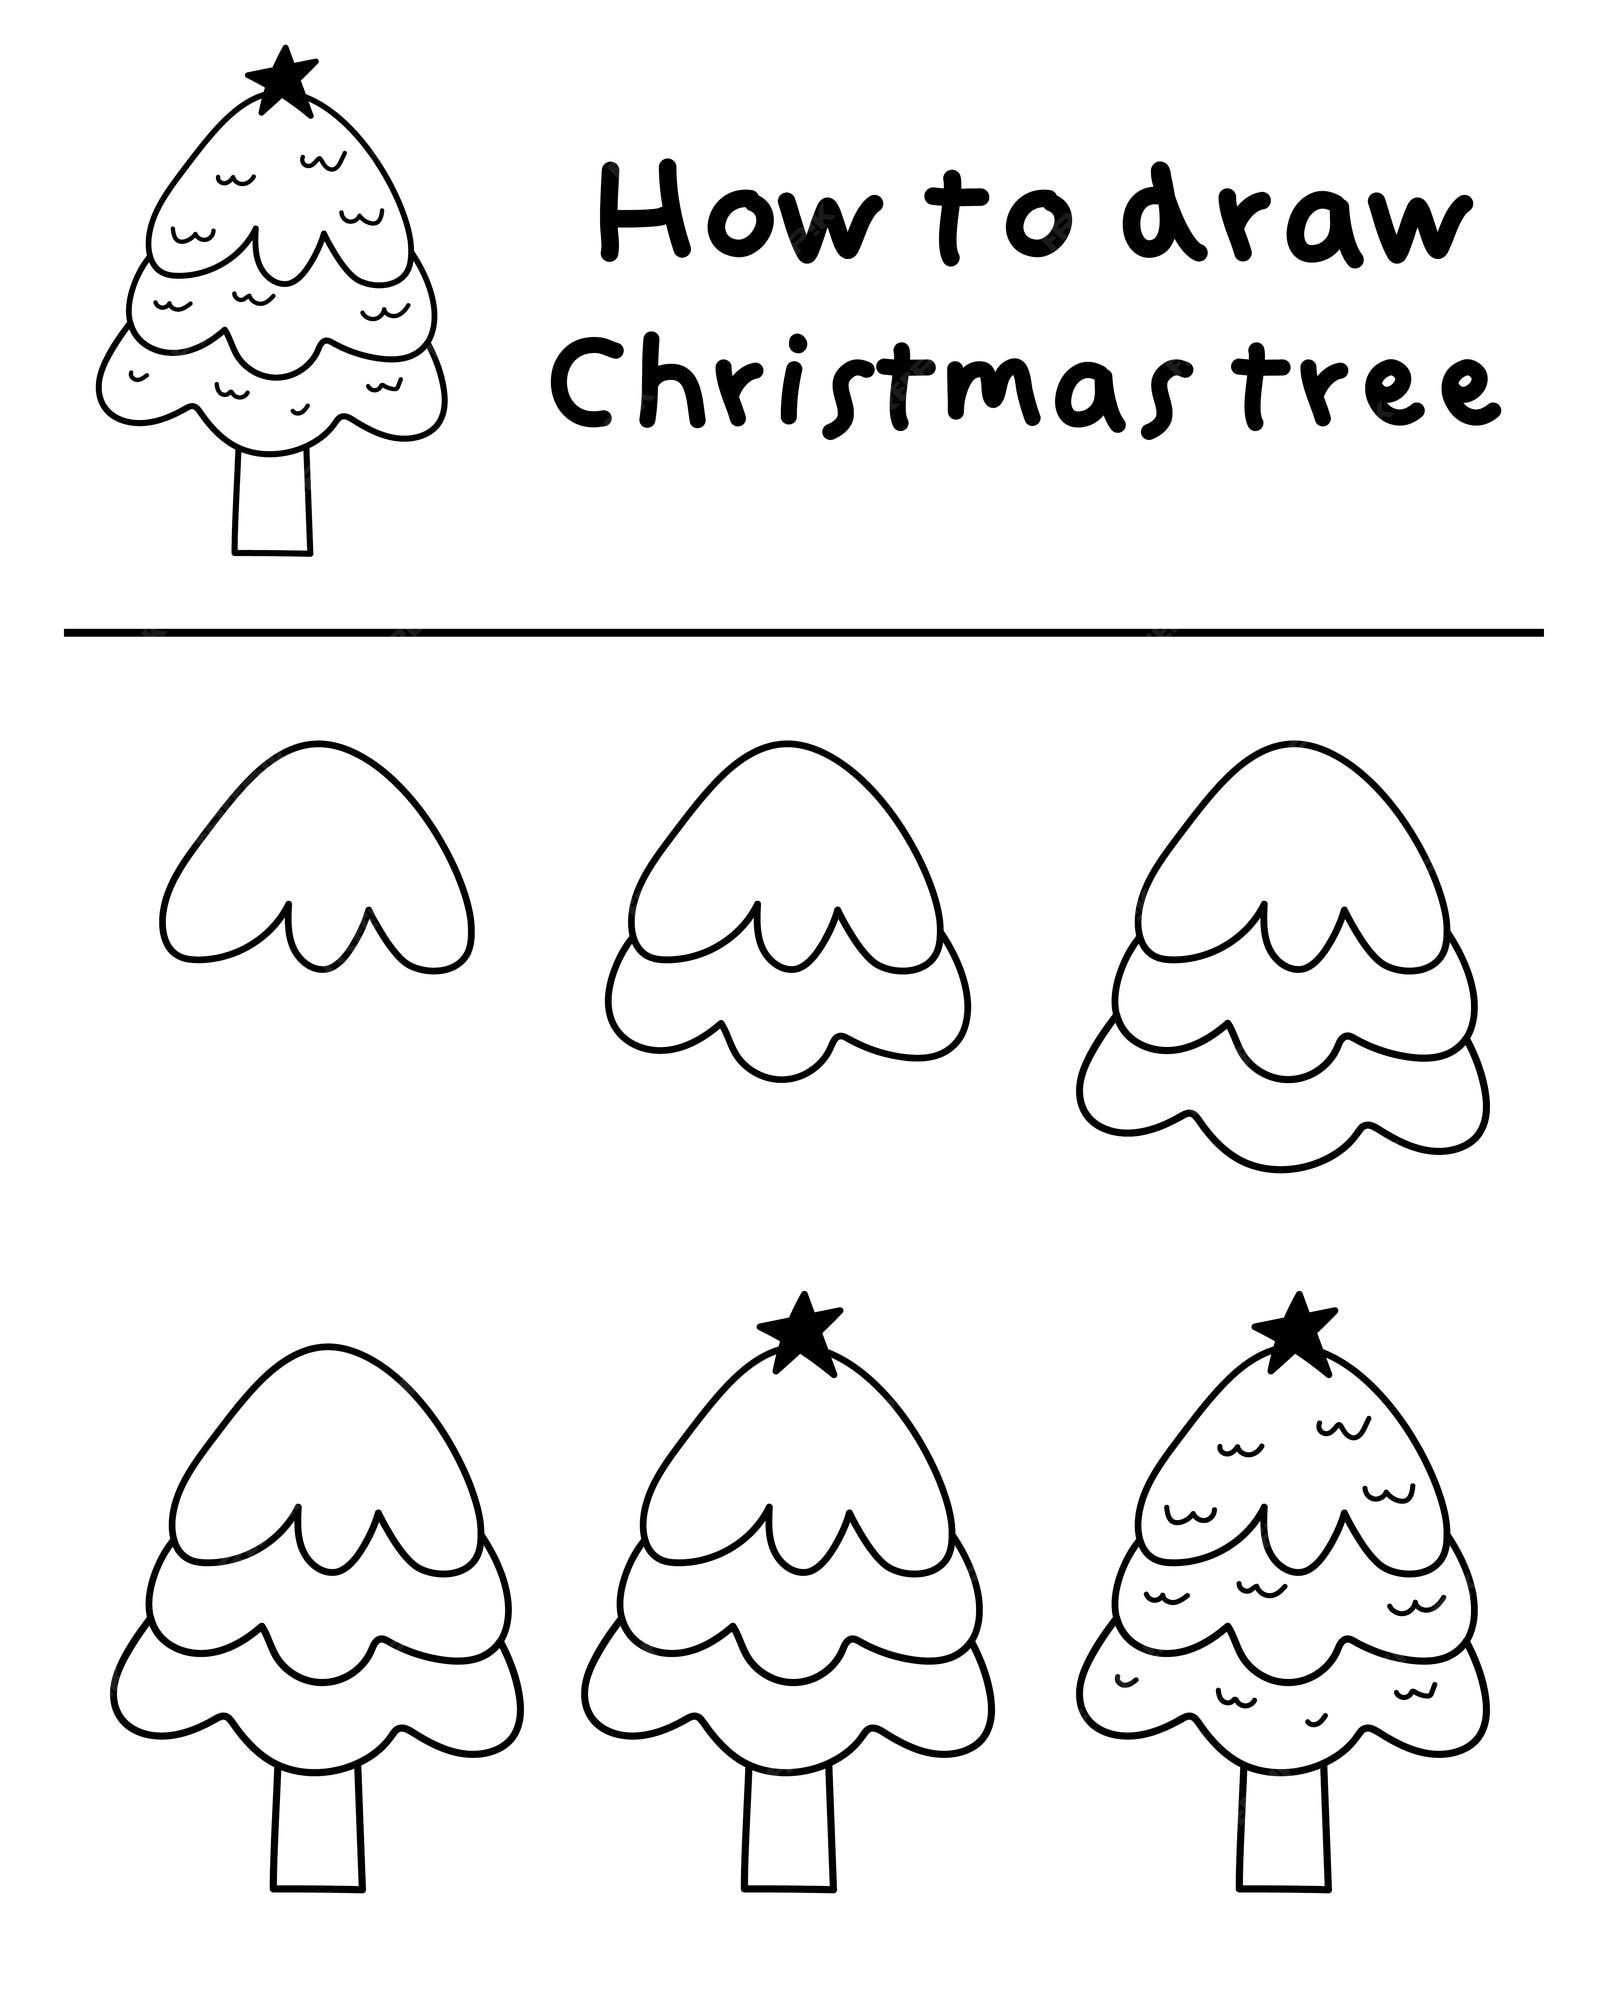 A simple Christmas tree Drawing Ideas